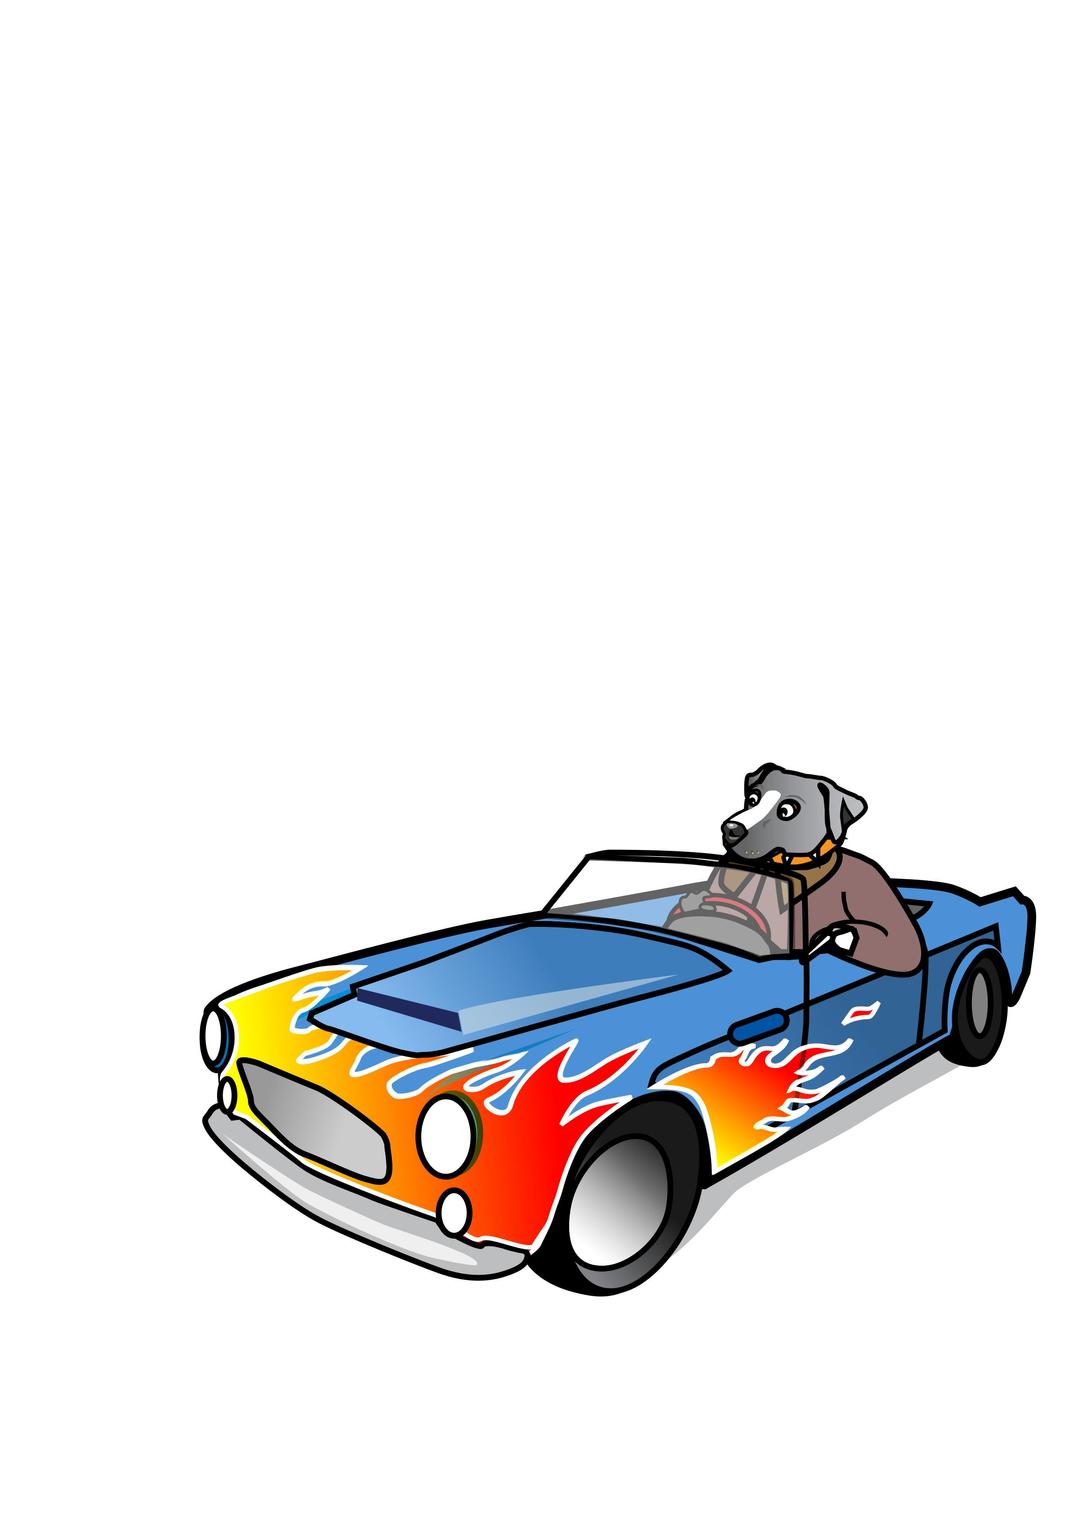 Dog in Sports Car png transparent